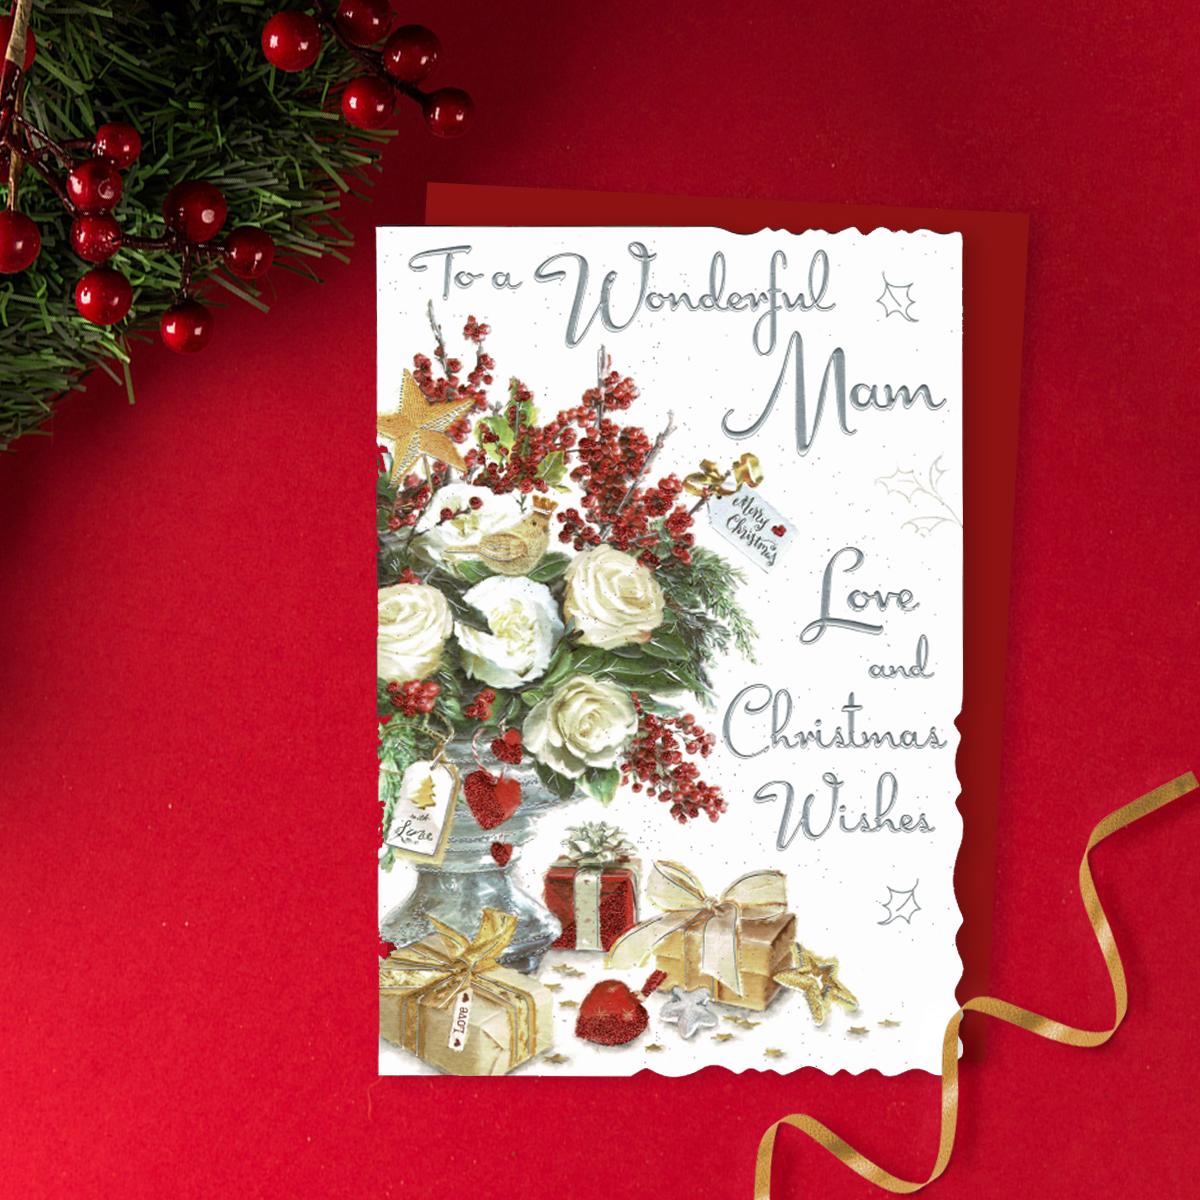 To A Wonderful Mam Love And Christmas Wishes Featuring A Vase Of White Roses And Red Berries Plus Gifts. Finished With Silver Foiled Lettering, Red Glitter Detail And Red Envelope